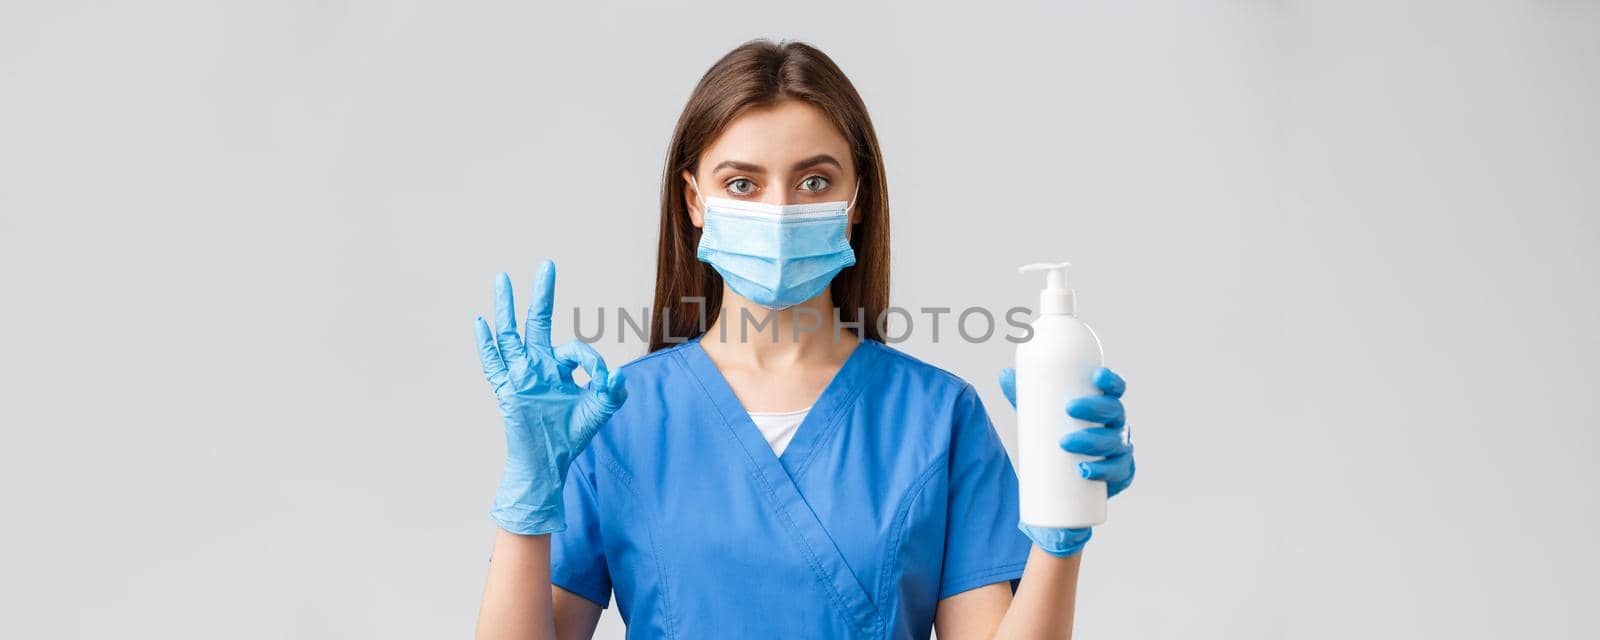 Covid-19, preventing virus, health, healthcare workers and quarantine concept. Confident serious female nurse, pretty doctor in scrubs and medical mask, show hand sanitizer, soap and okay sign.